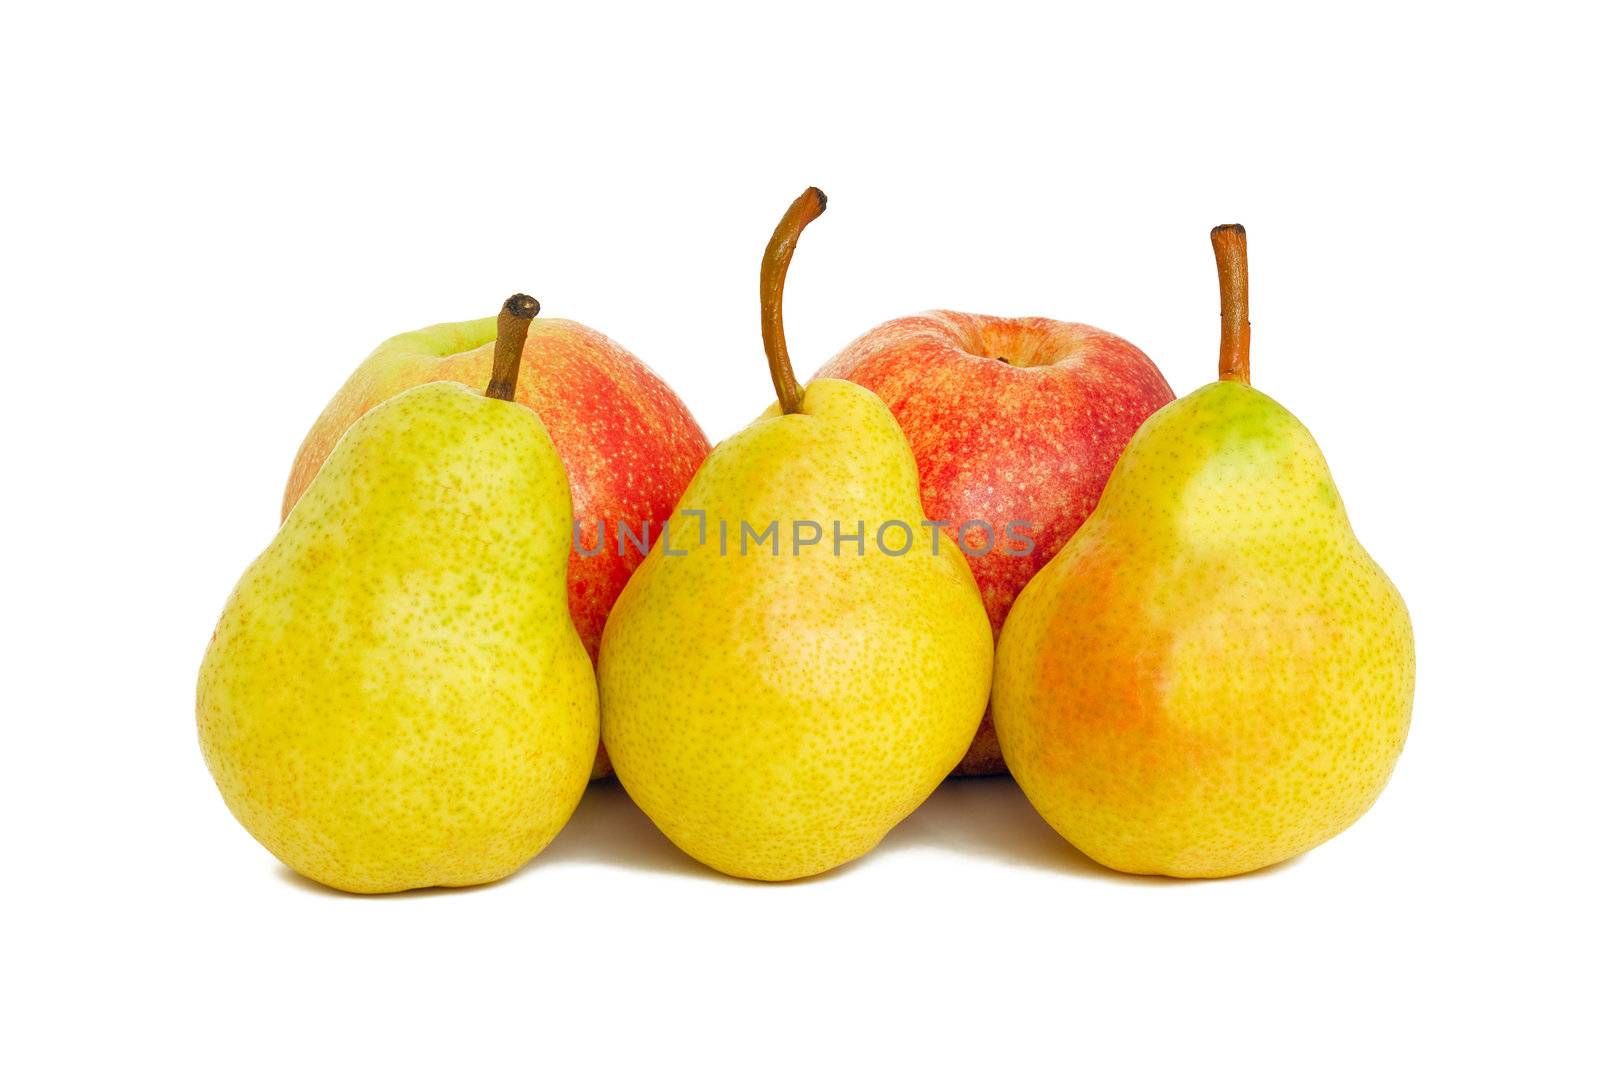 Various fruits - apples, pears, isolated on a white background.